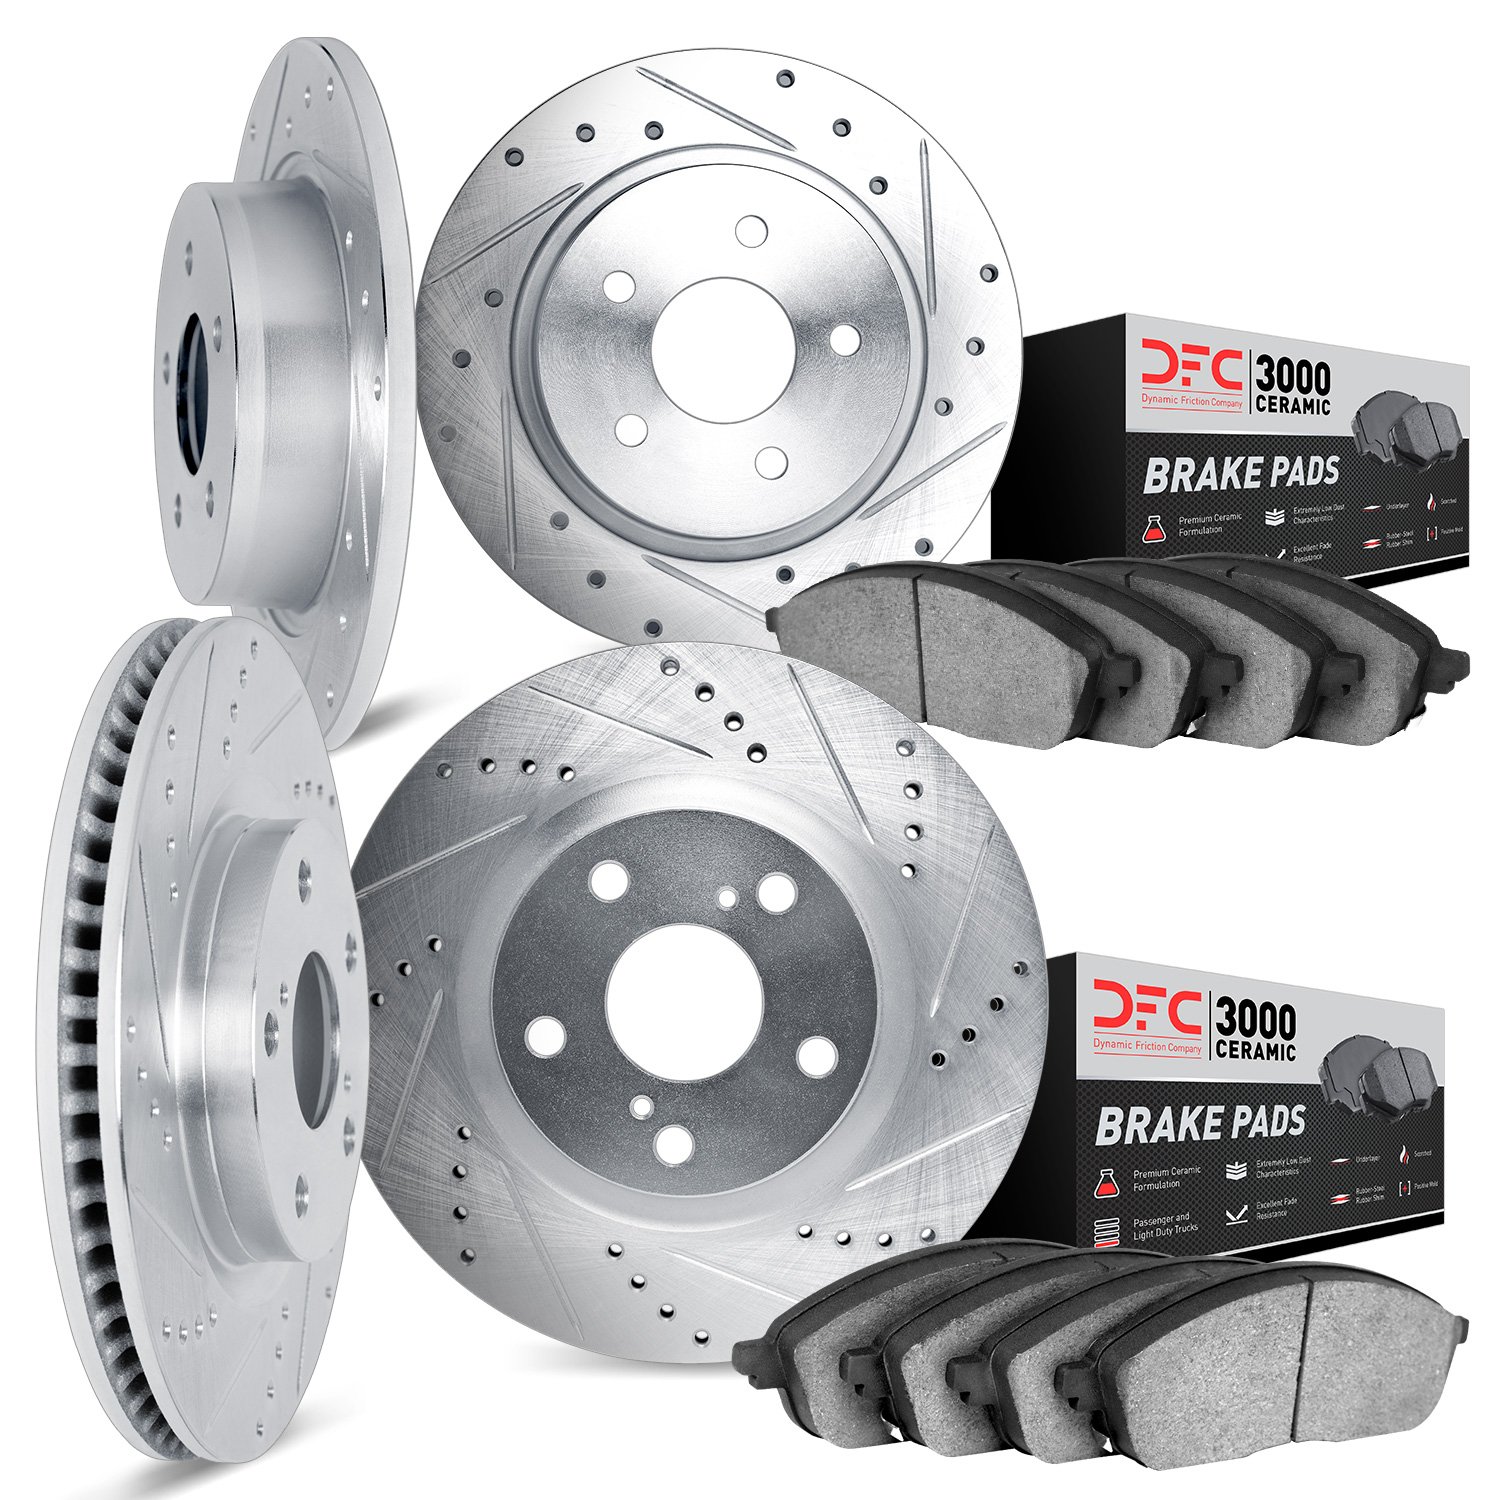 7304-56028 Drilled/Slotted Brake Rotor with 3000-Series Ceramic Brake Pads Kit [Silver], 2003-2011 Ford/Lincoln/Mercury/Mazda, P